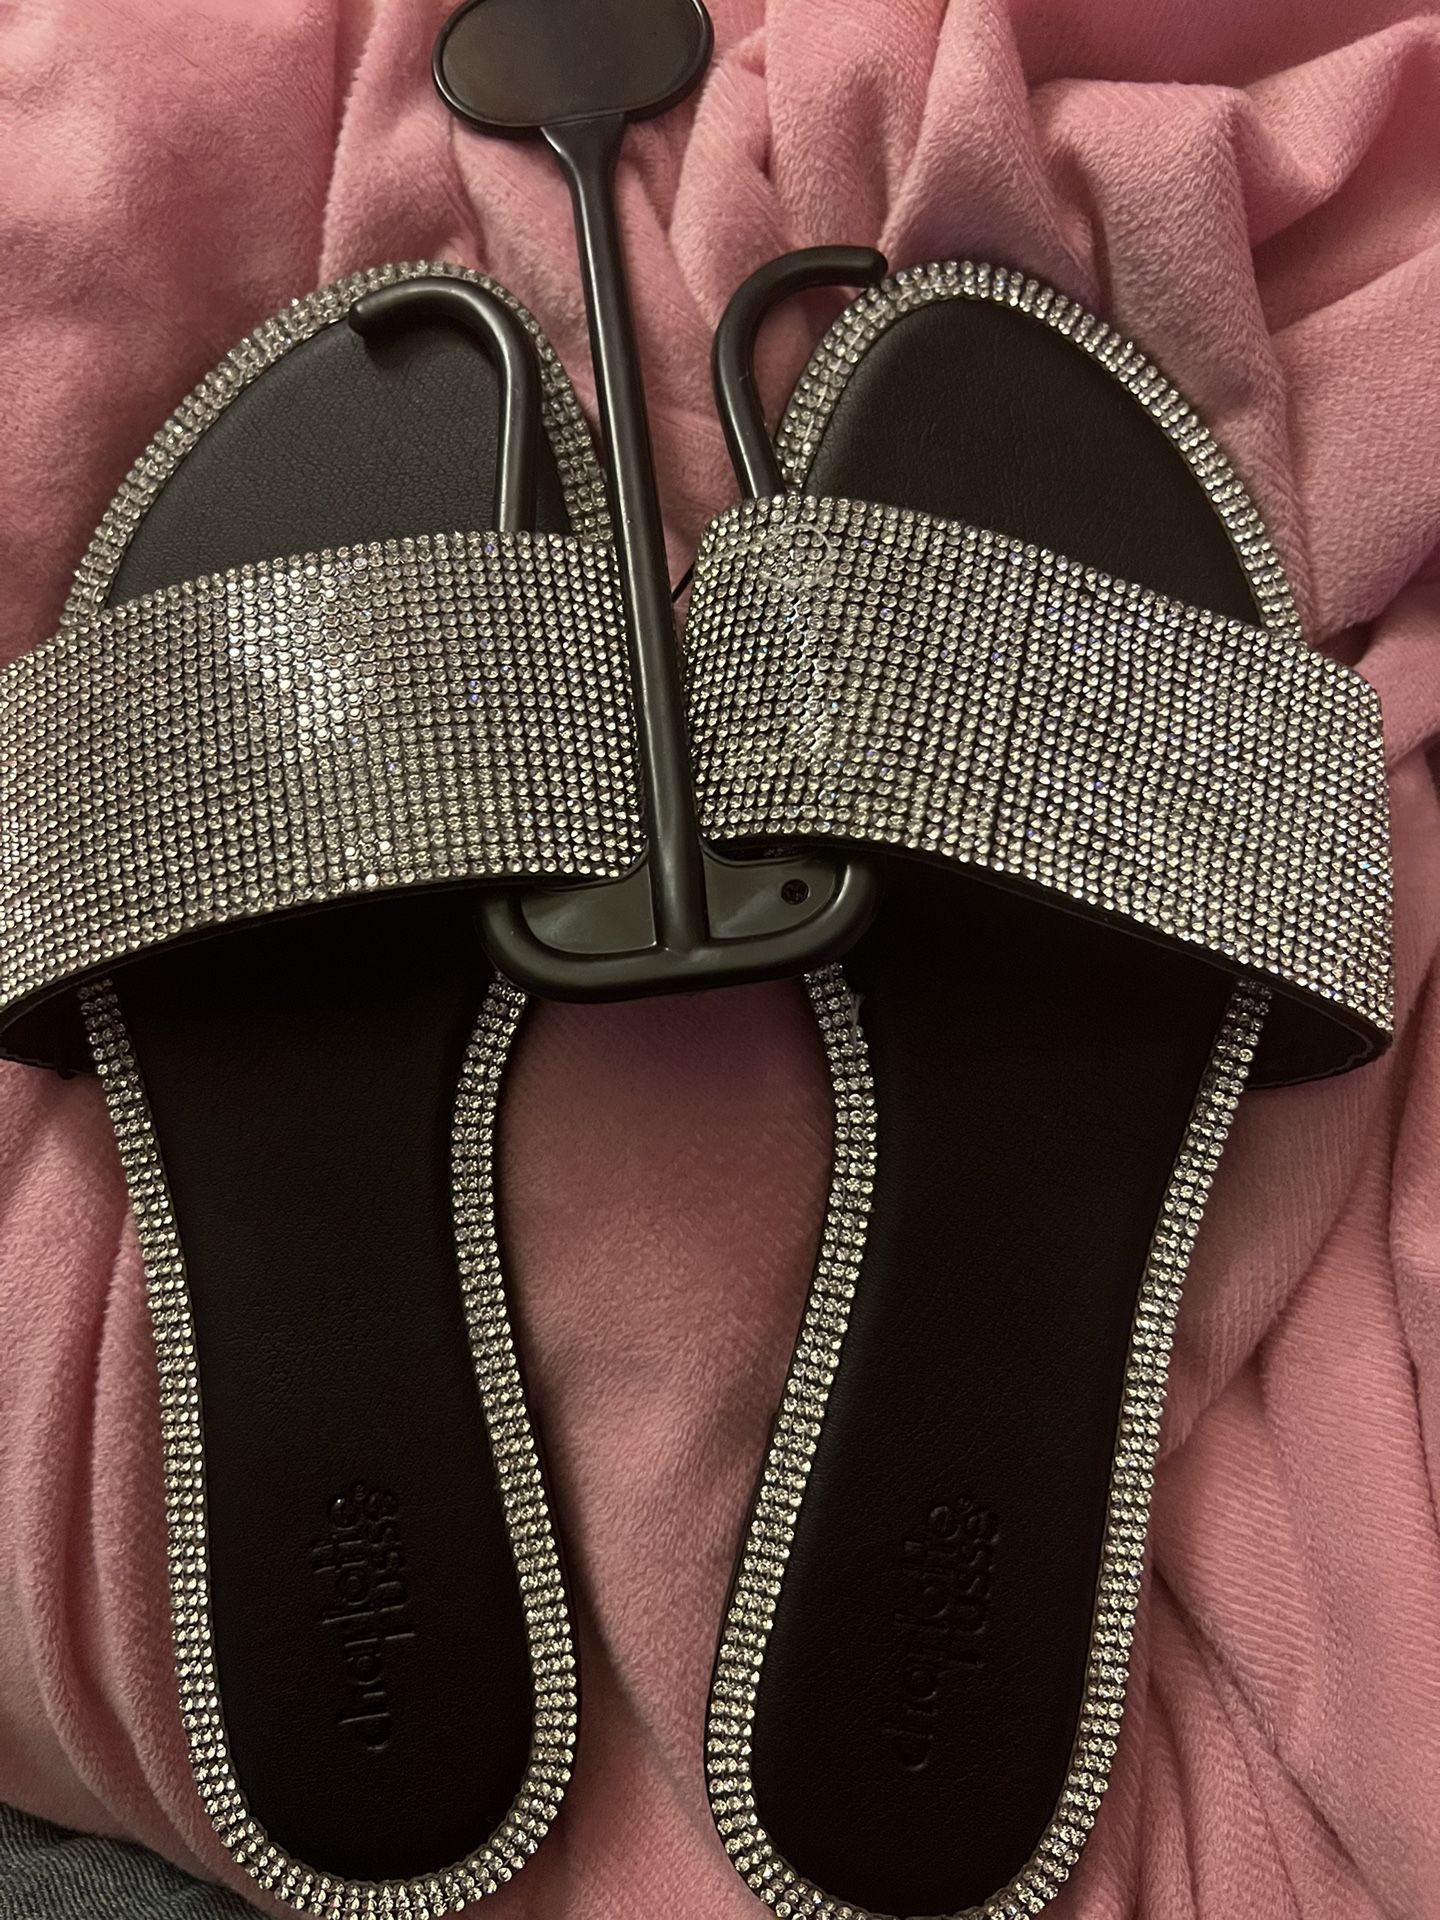 Brand New Size US 8W Black and Silver Sandals